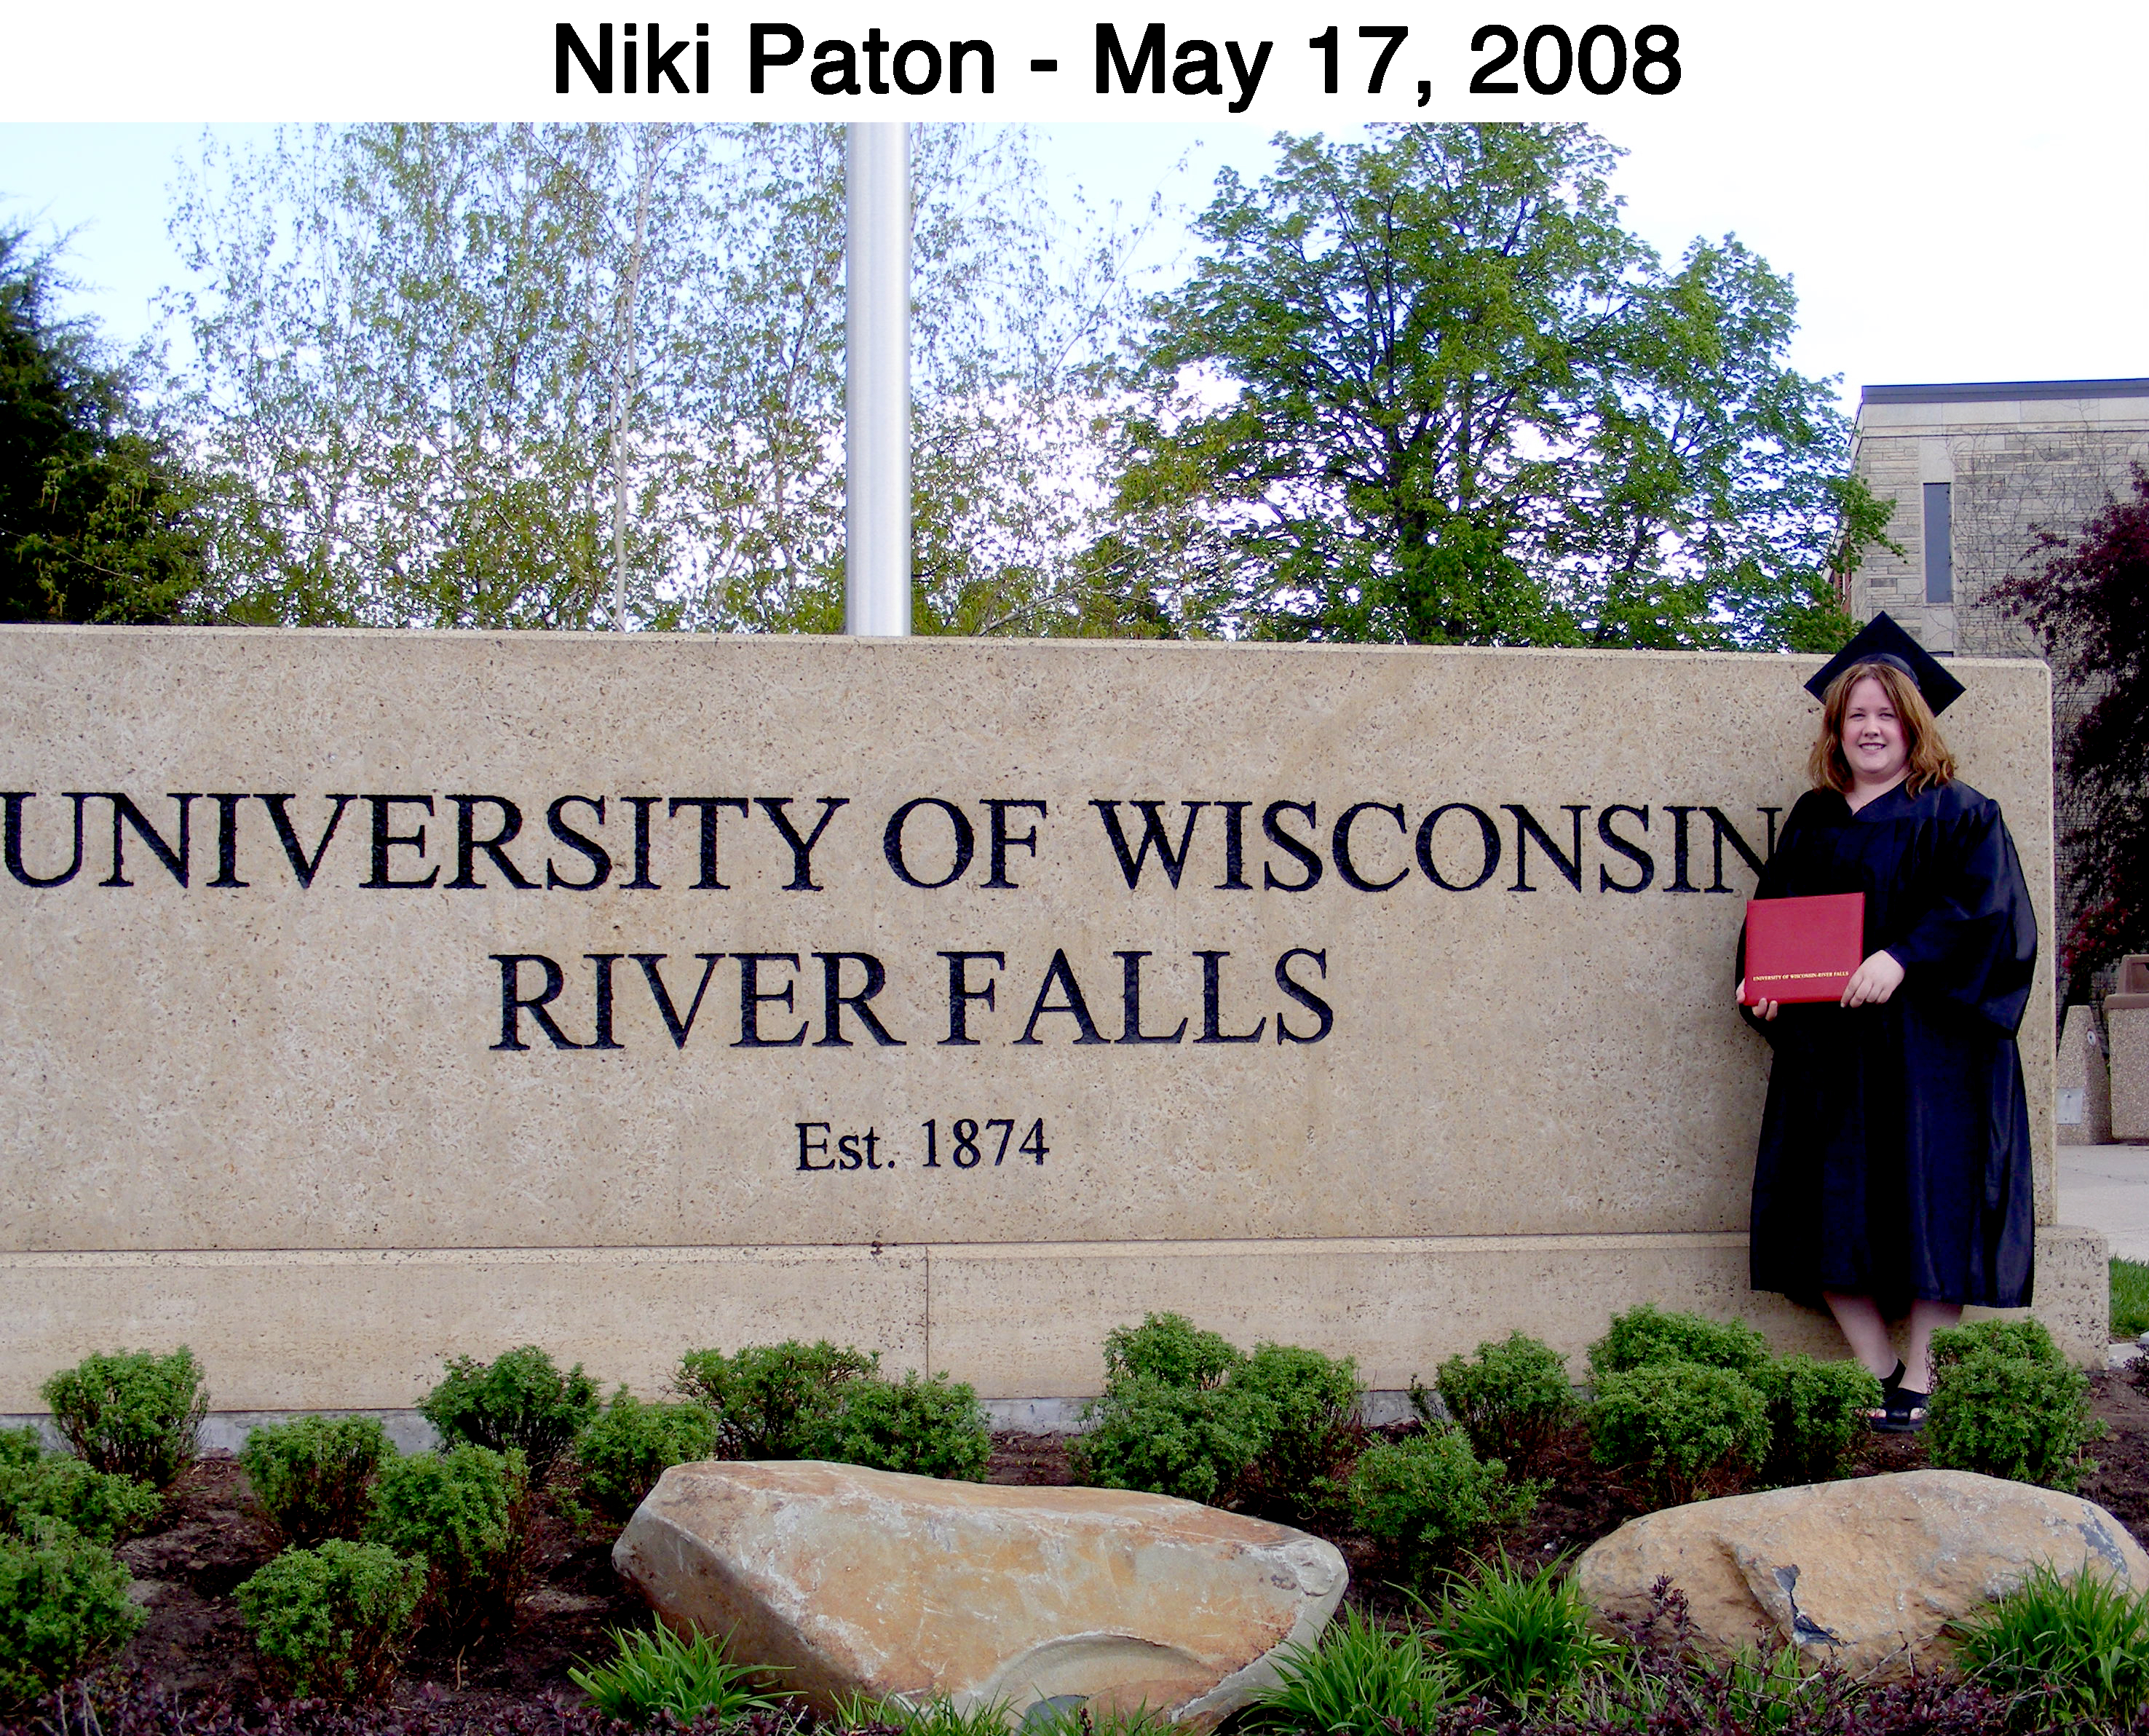 Niki Paton in her graduation robes at the University of Wisconsin-River Falls